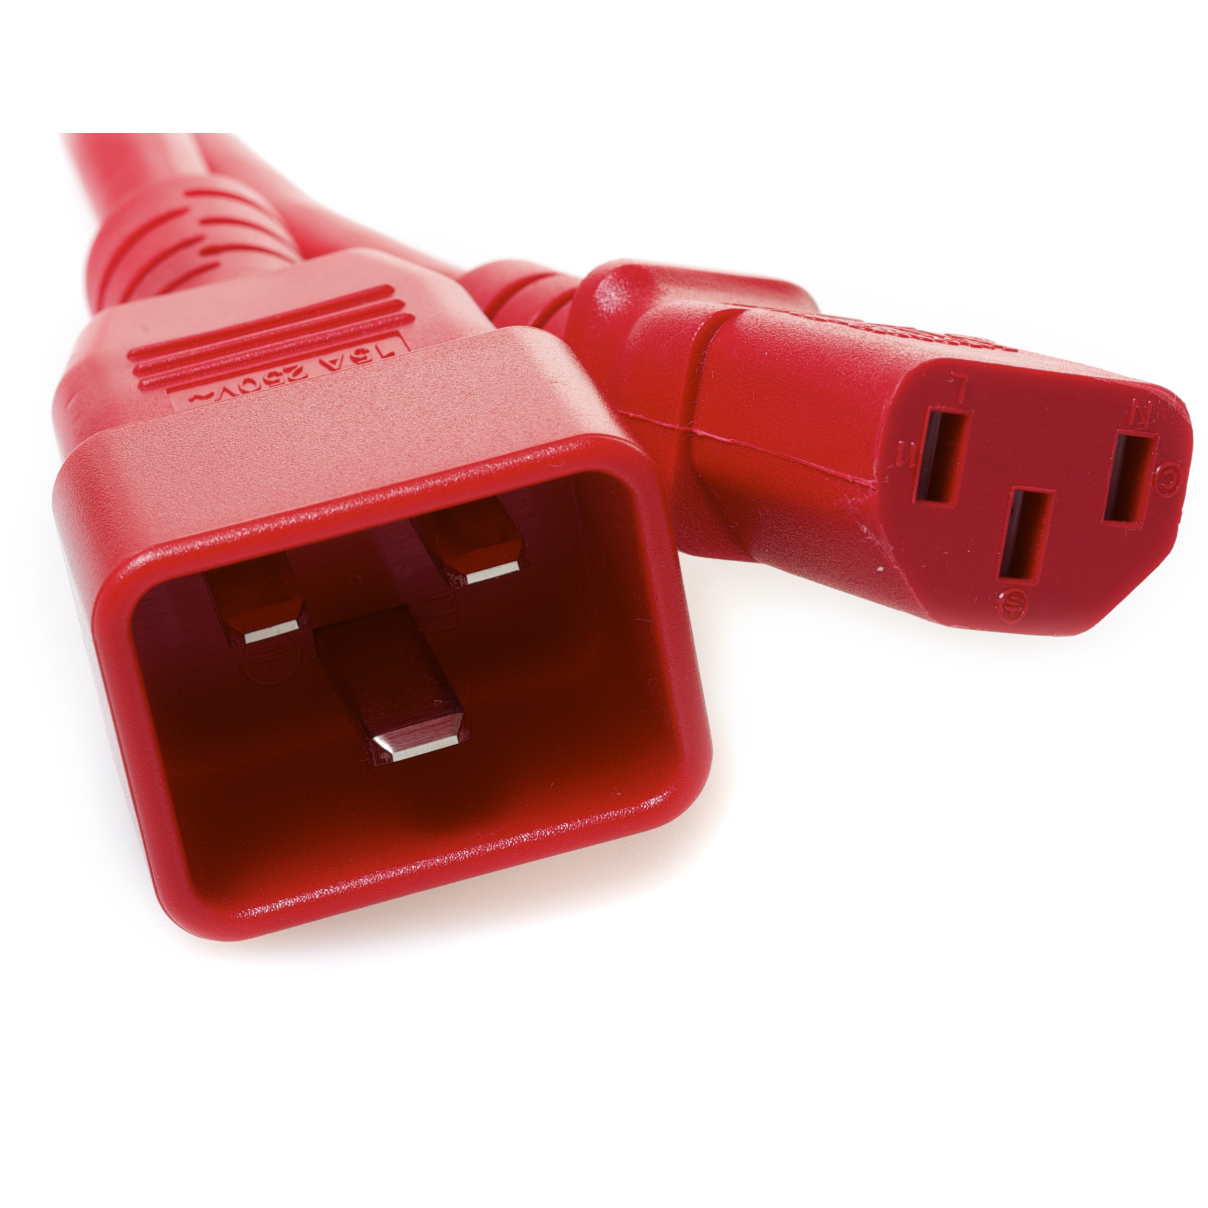 C20 Plug Male to C13 Connector Female 1 Feet 15 Amp 14/3 SJT 250v Power Cord- Red